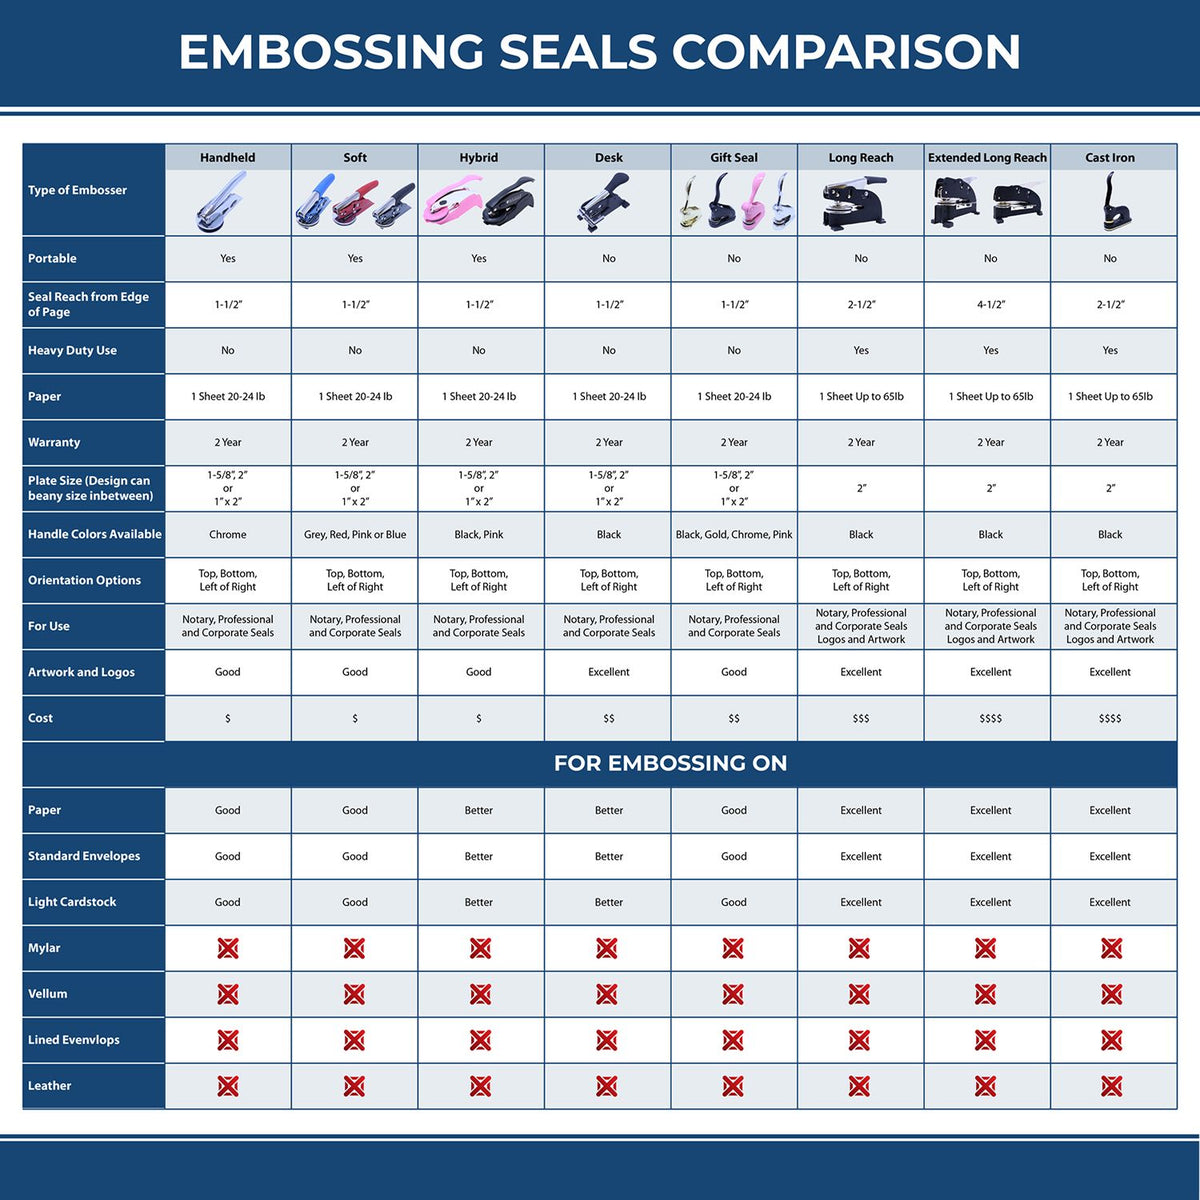 A comparison chart for the different types of mount models available for the Gift Washington Architect Seal